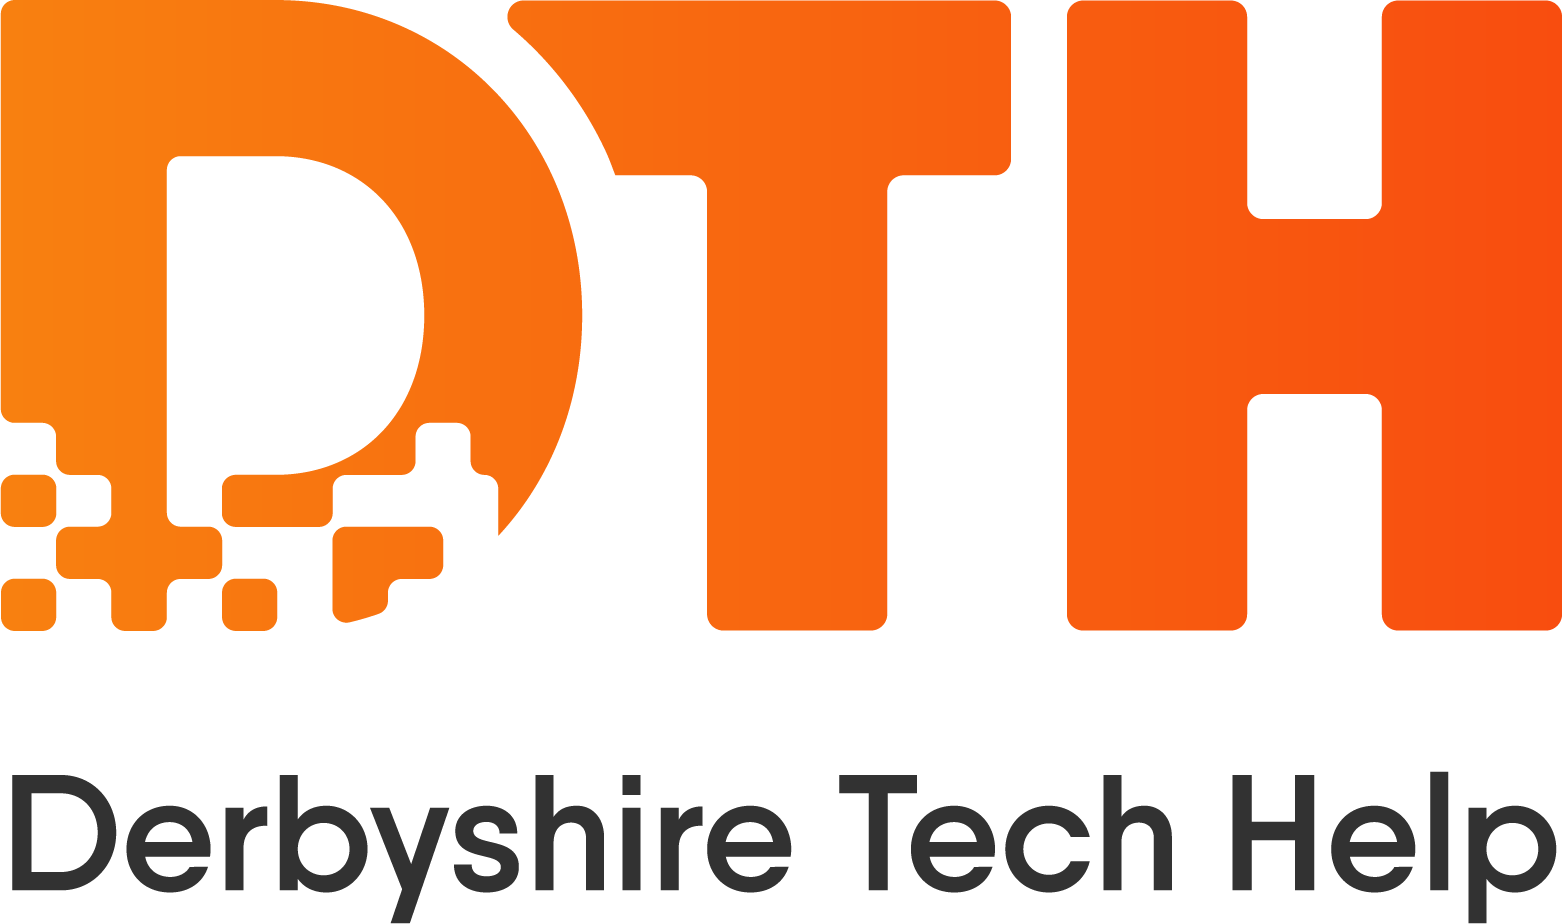 Derbyshire Tech Help - Computer and Device Help for Individuals and Small Business